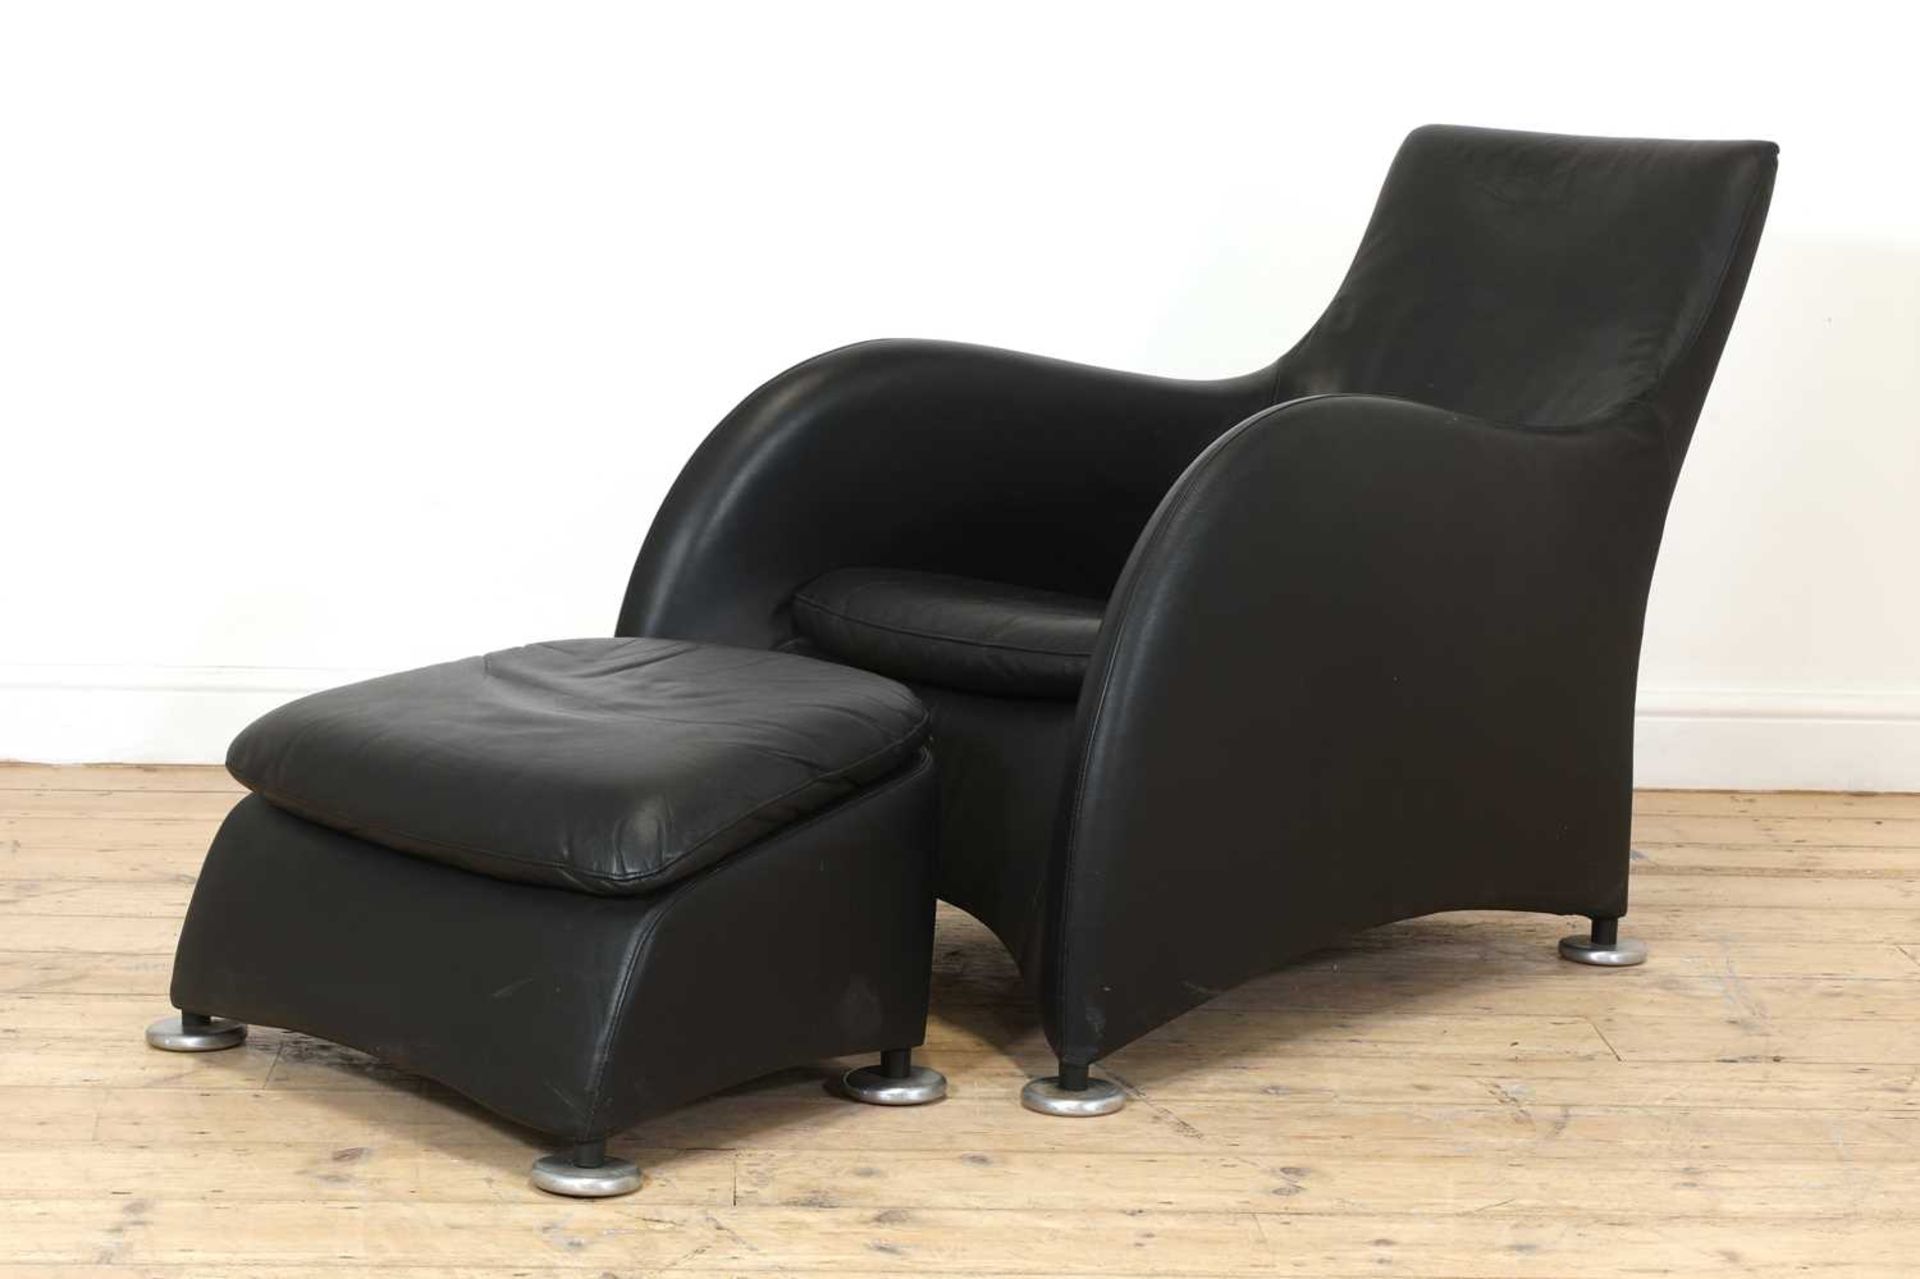 A leather lounger and ottoman, - Image 3 of 10